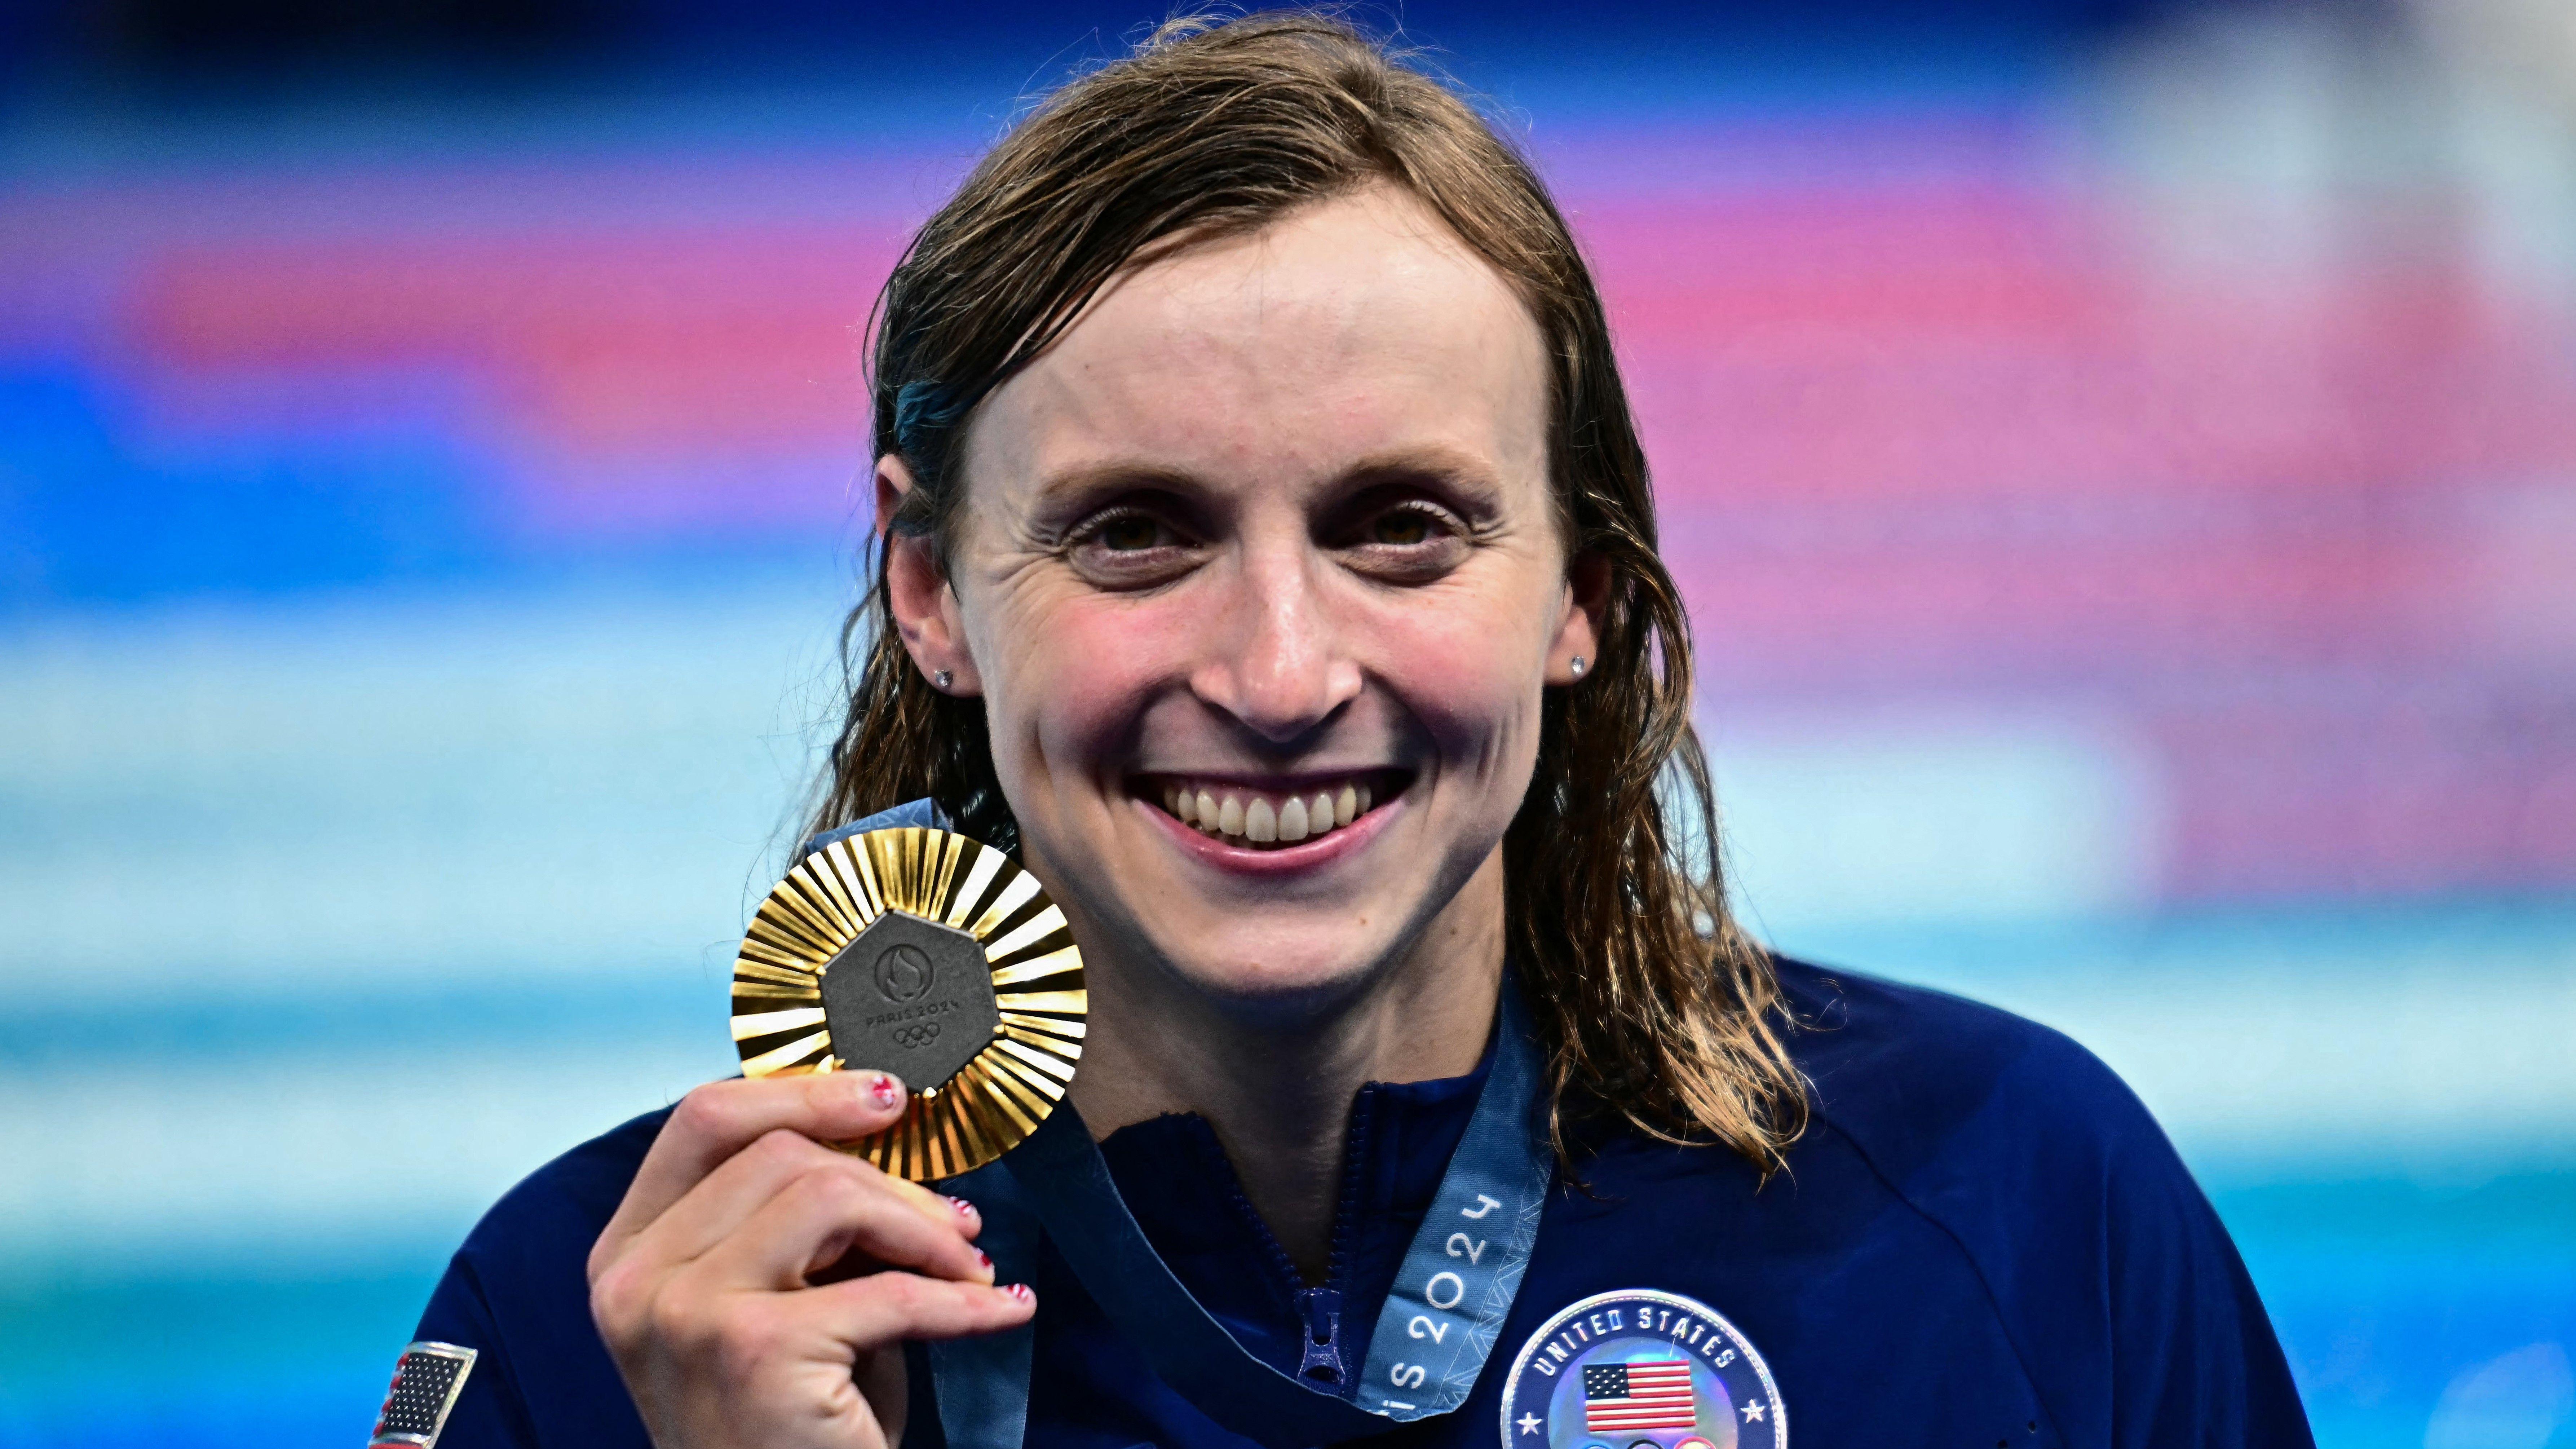 Queen of the pool Ledecky wins record-equalling ninth gold